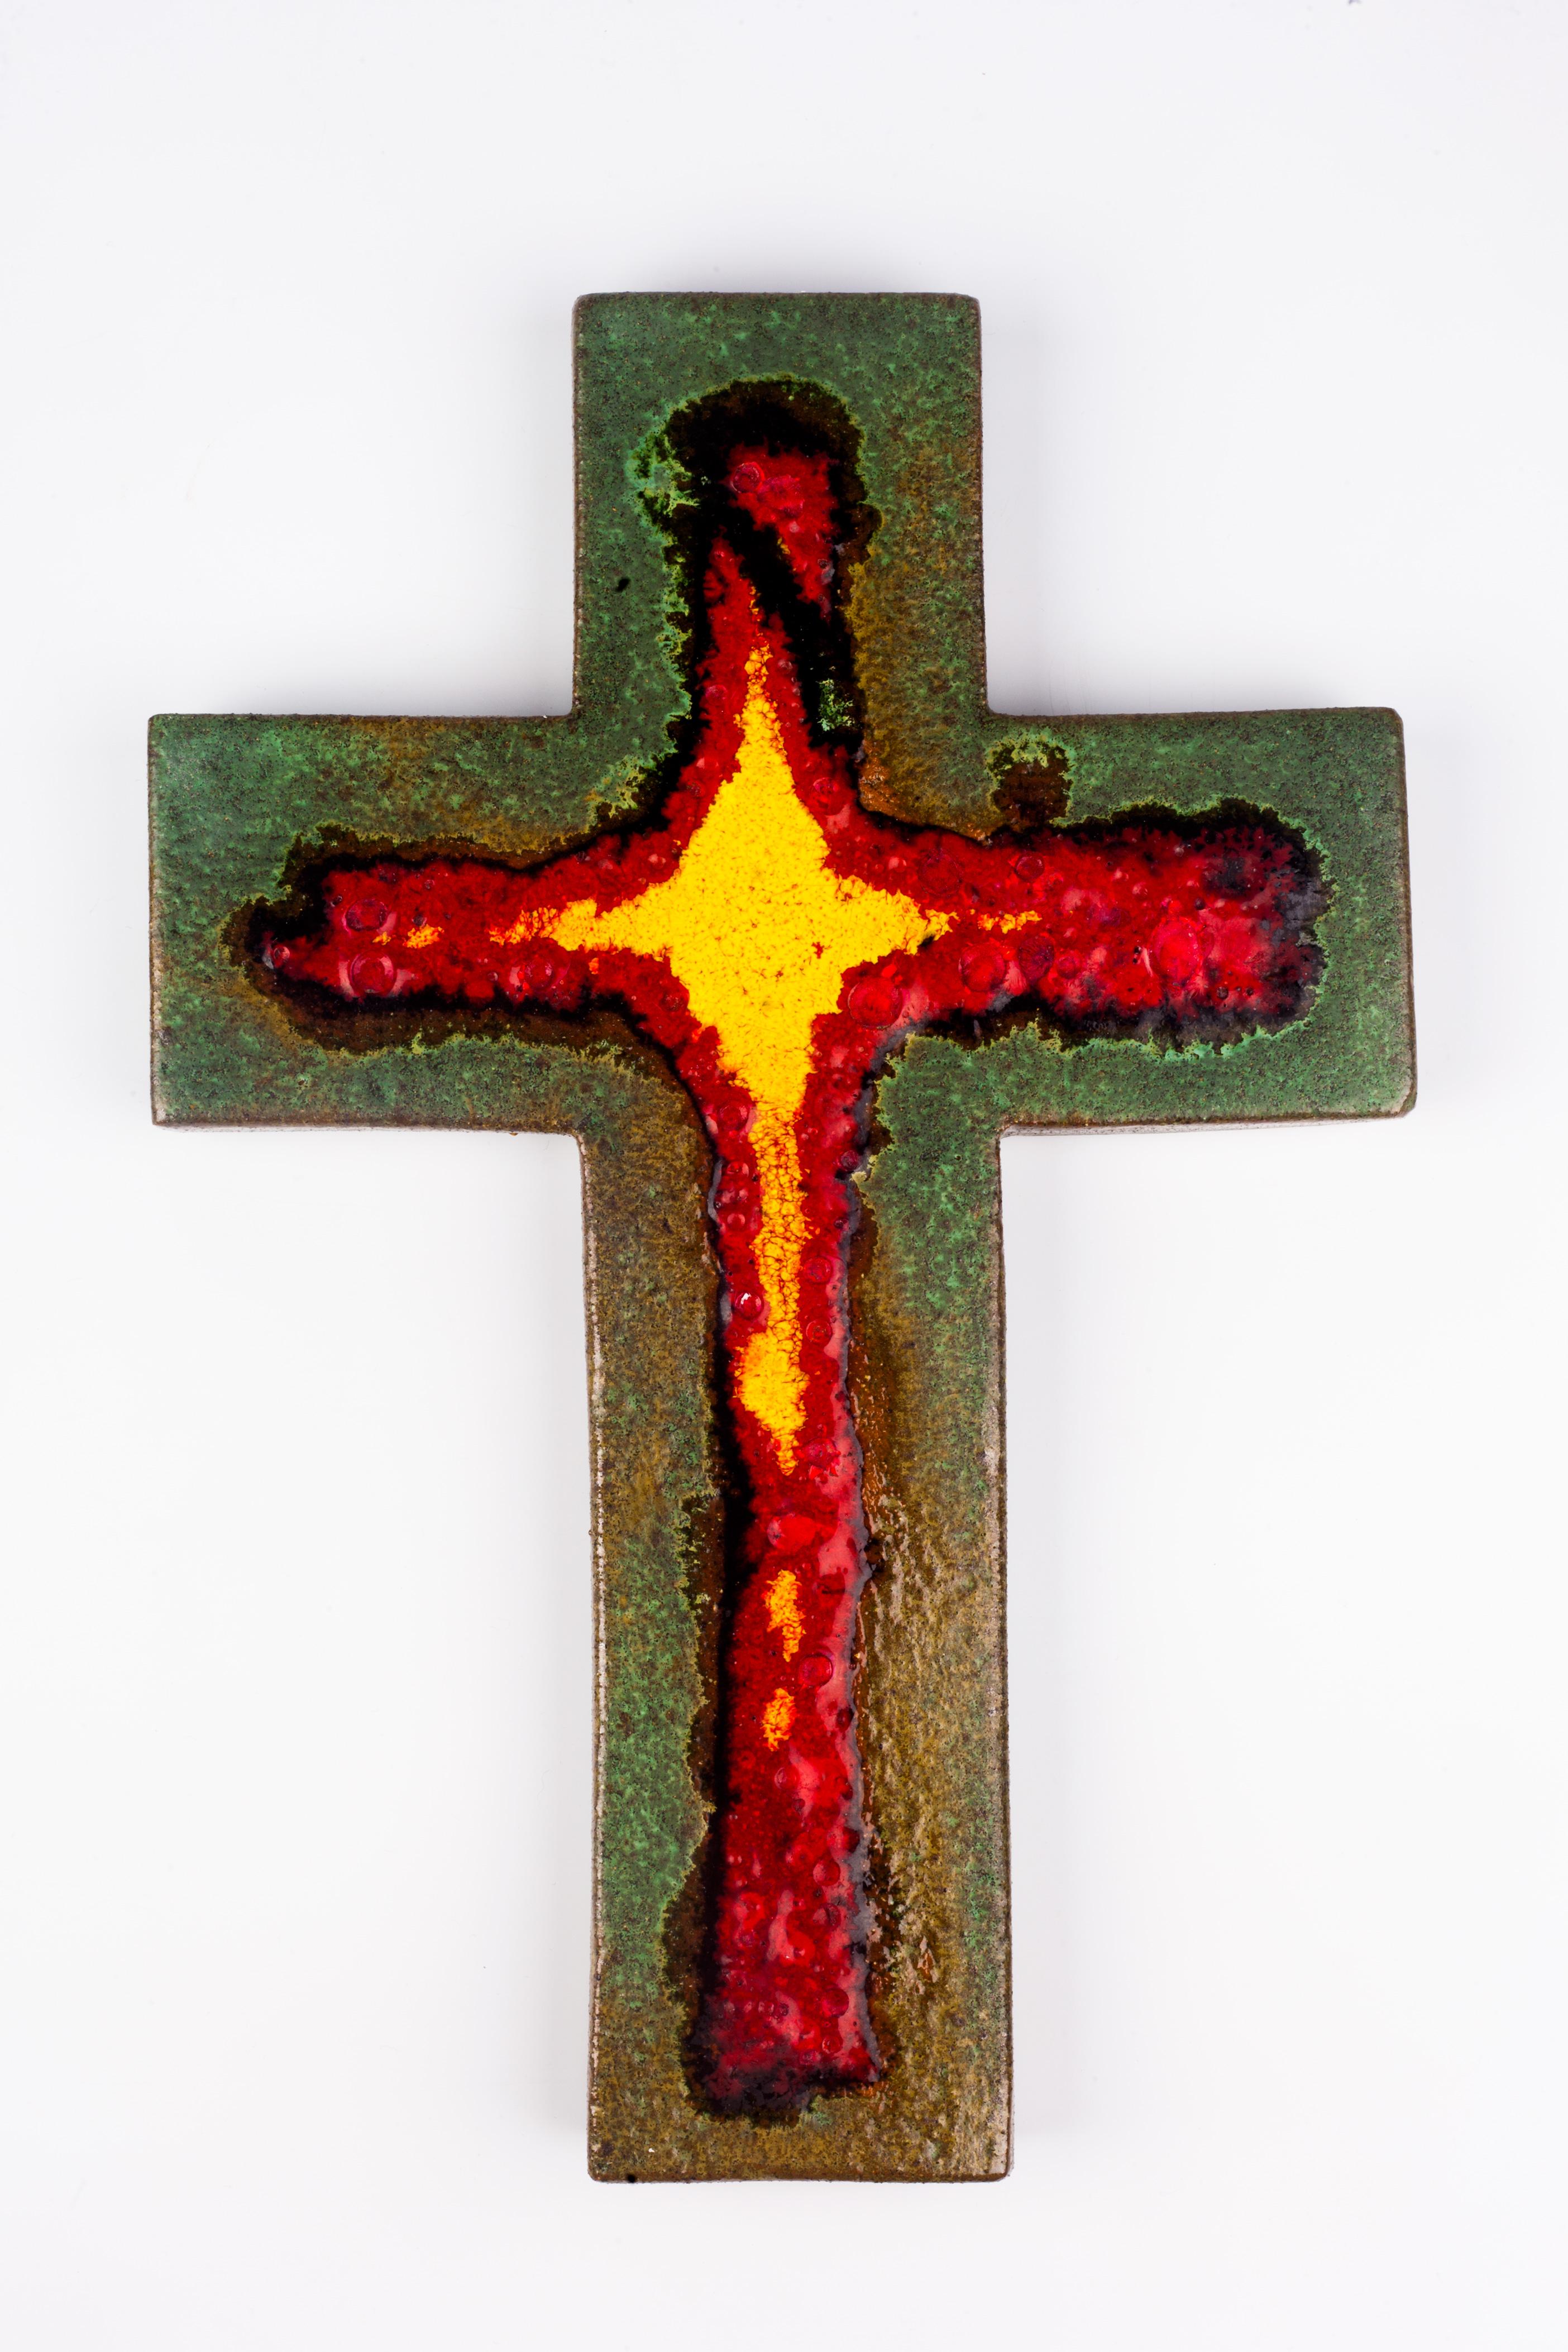 Eleven inch tall wall crucifix in ceramic, handmade in Belgium in the 1980s. Glossy marine green cross with red and yellow interior cross shape. The color red has fat lava textured craters. A large piece with eye catching juxtaposition of colors.